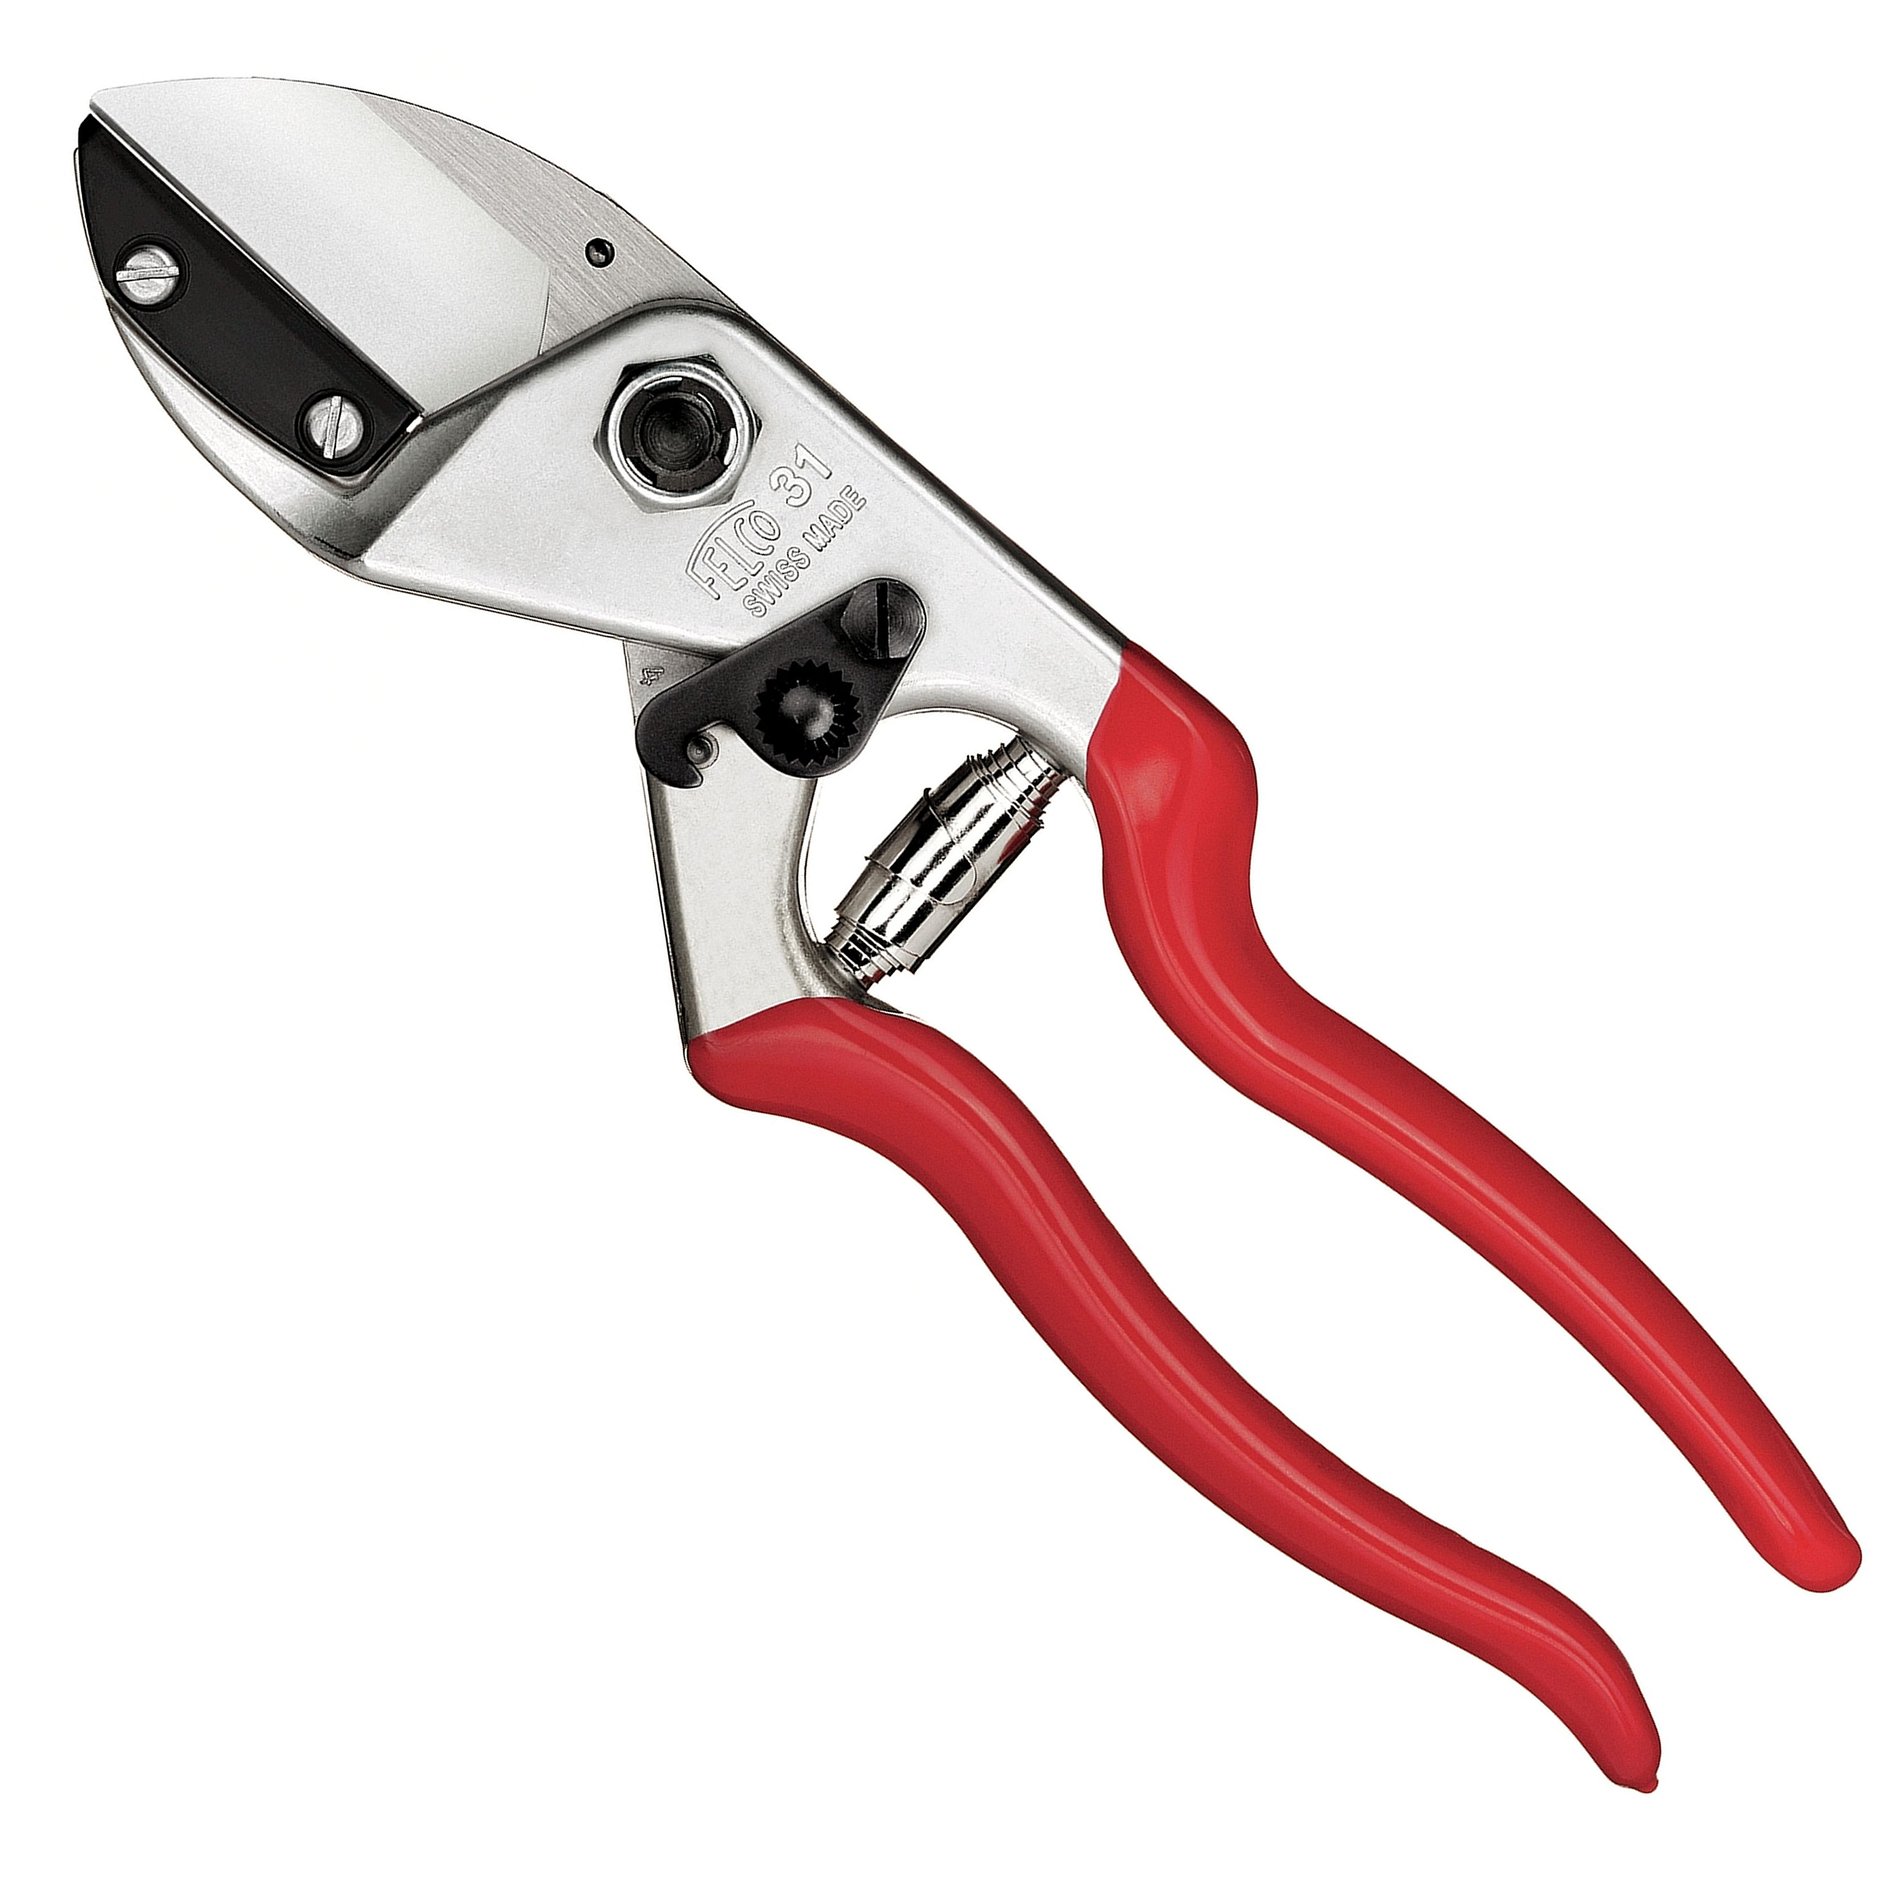 Felco Model 31 Anvil secateurs - hard wood pruners - professional swiss made - official Felco stockist